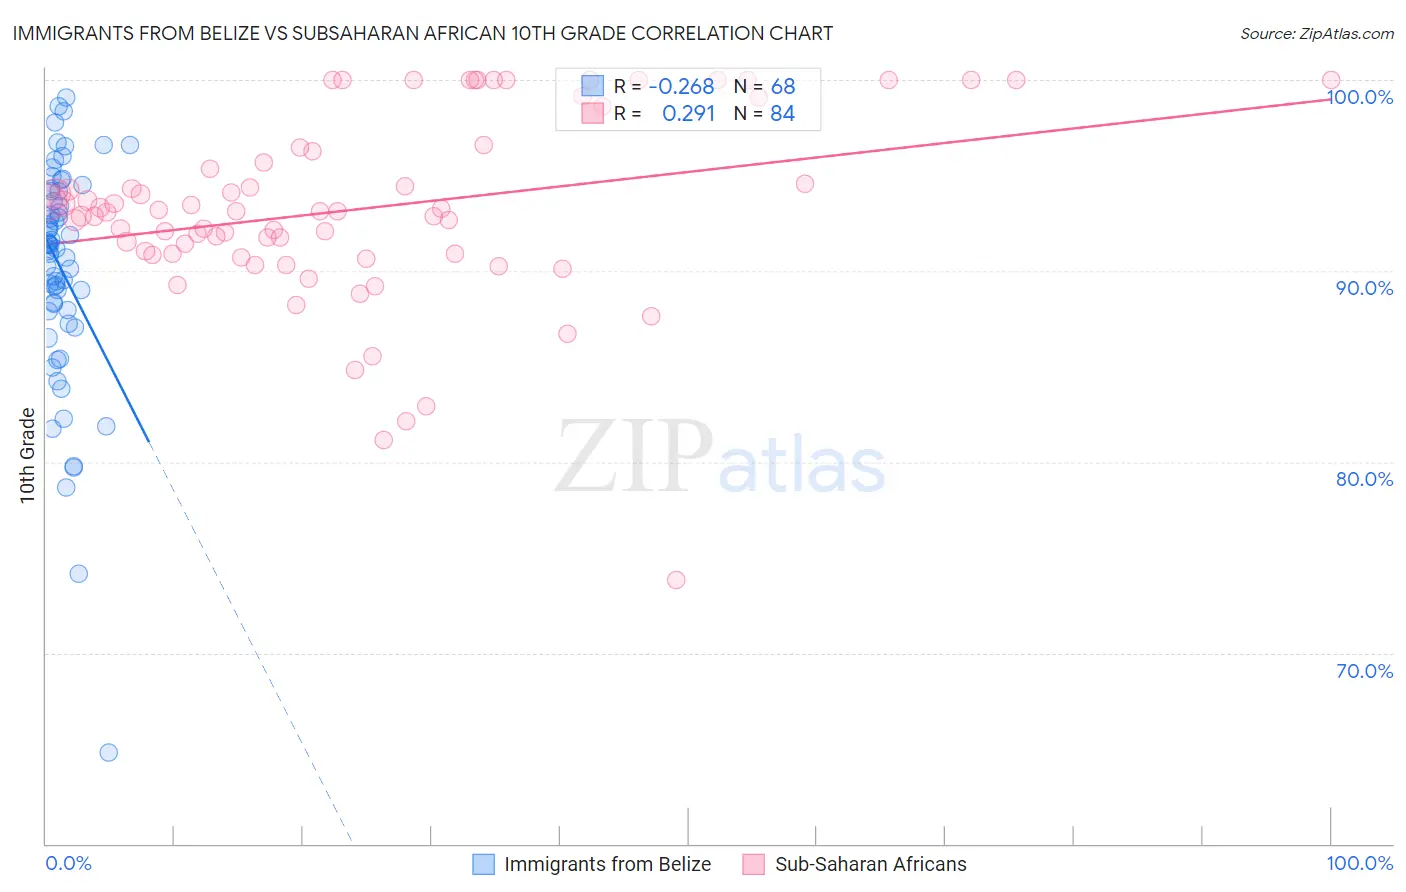 Immigrants from Belize vs Subsaharan African 10th Grade